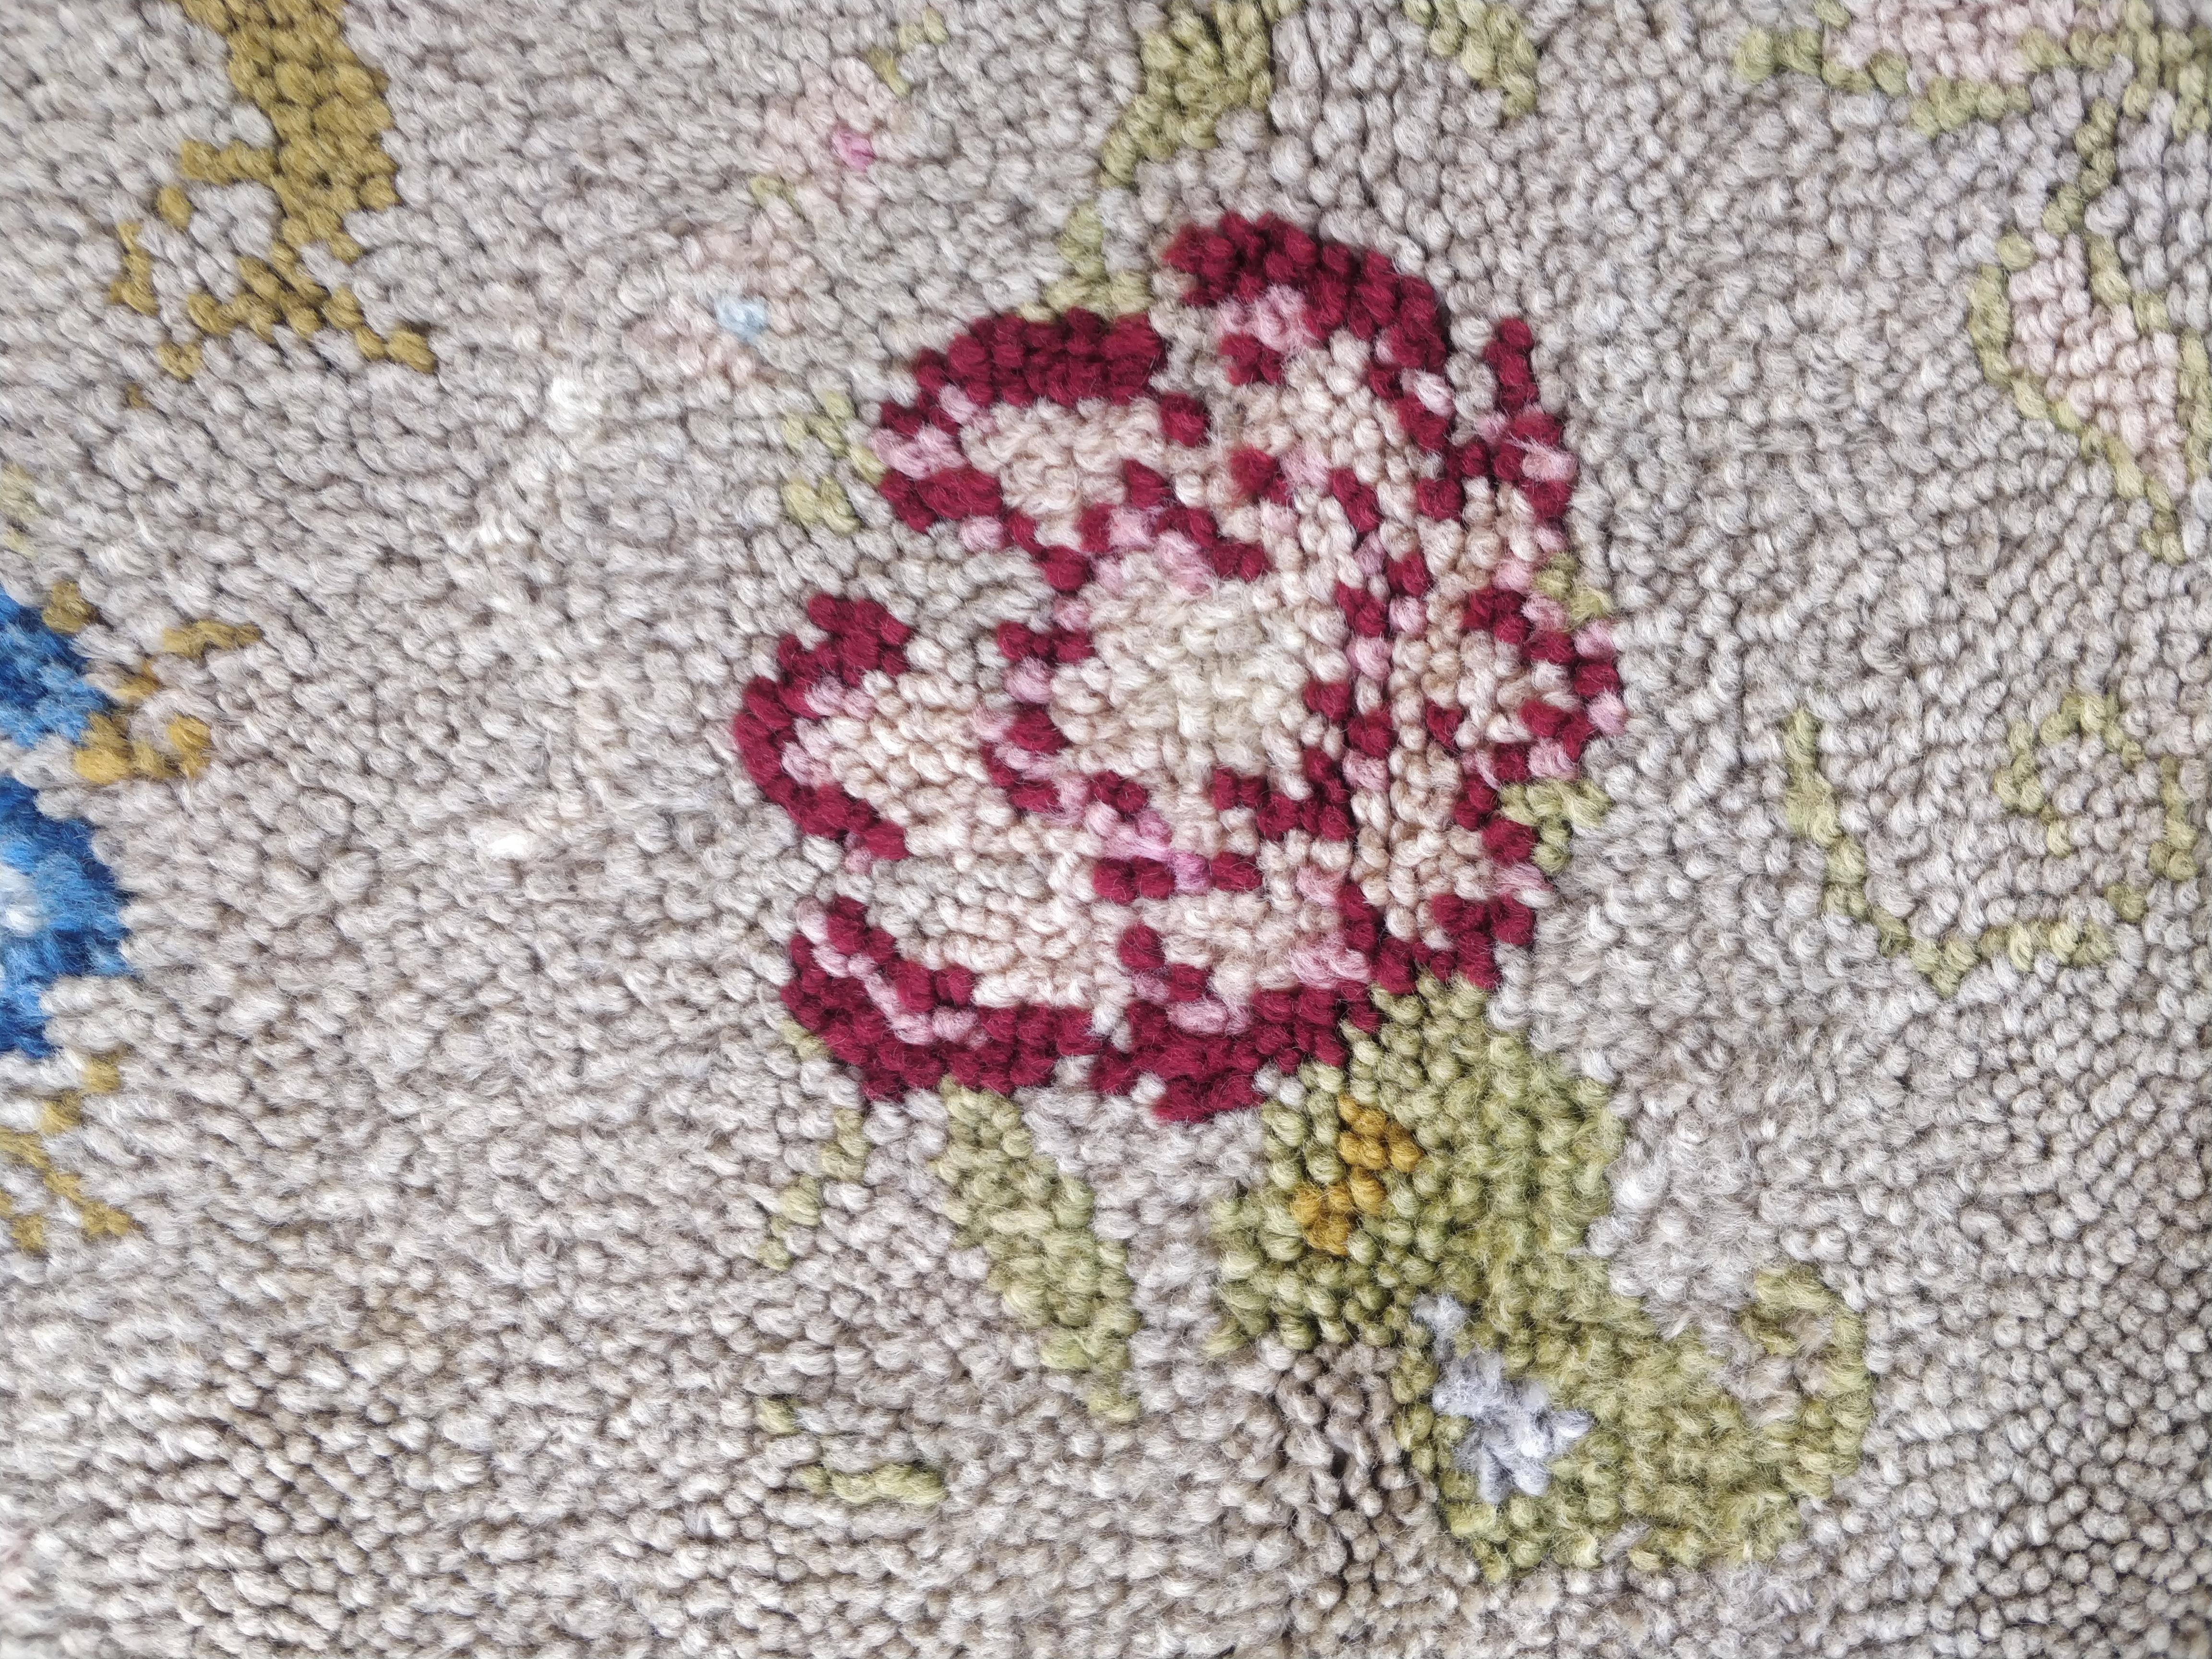 Rare hand-knotted Cogolin carpet (France). 1950s.
Founded in 1928 by Jean Lauer, the Manufacture Cogolin experienced significant growth from the 1930s onward.
From handcrafting to weaving on 19th-century Jacquard arm looms, the Cogolin carpet is